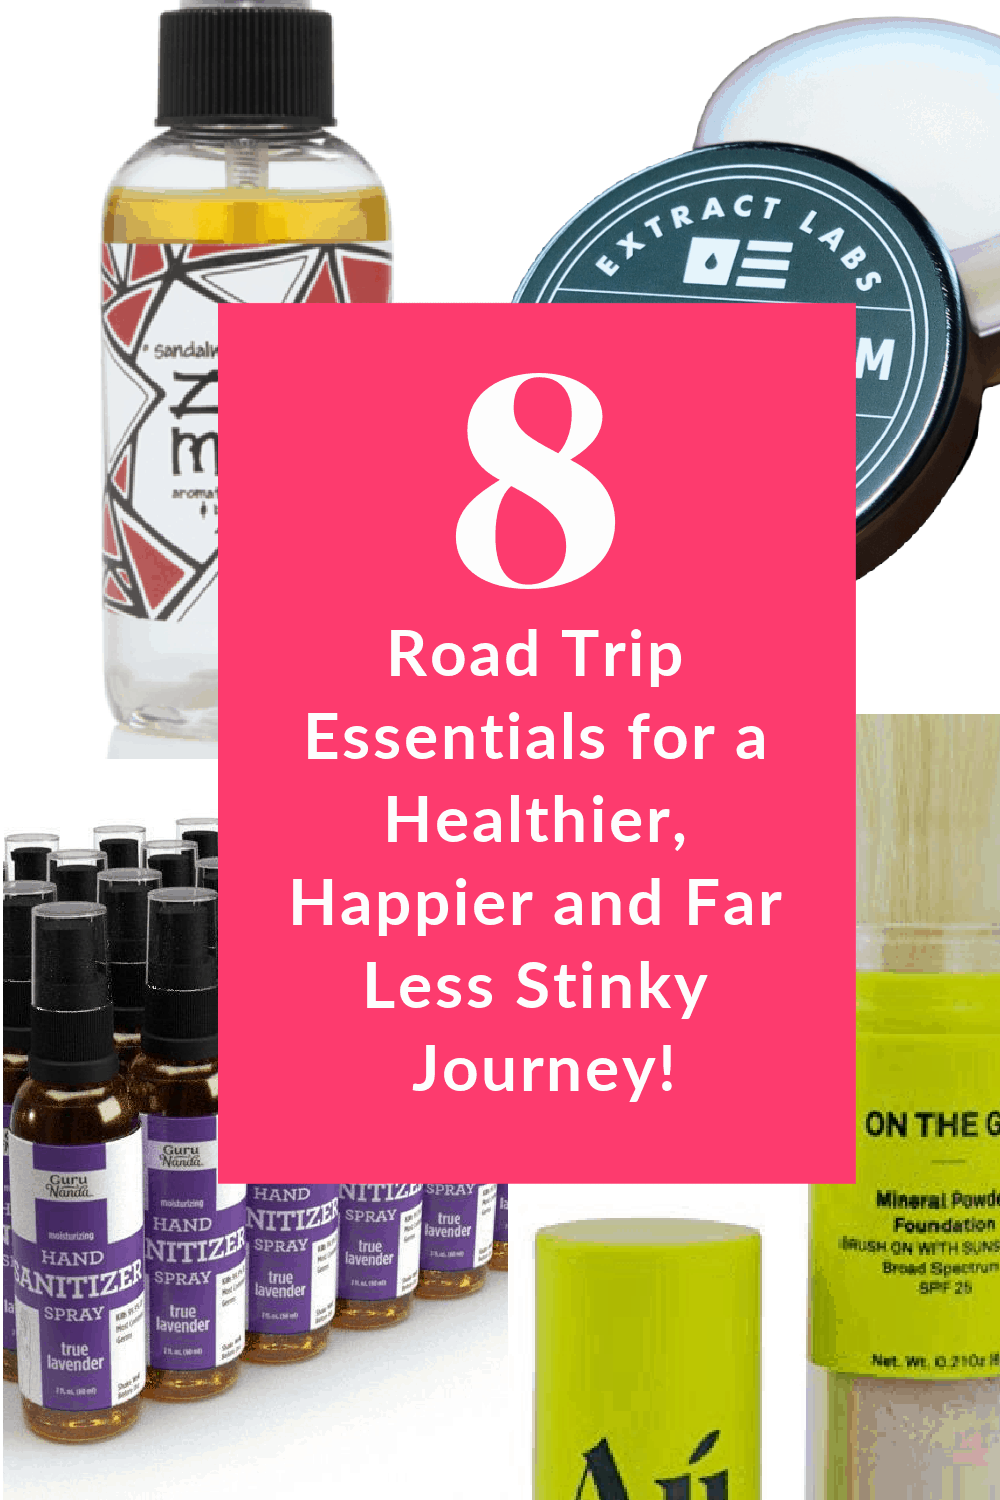 Before you hit the highway for your next road trip, make sure you pack these essentials! They'll keep you looking and feeling great (and a whole lot less stinky!). Check them out!